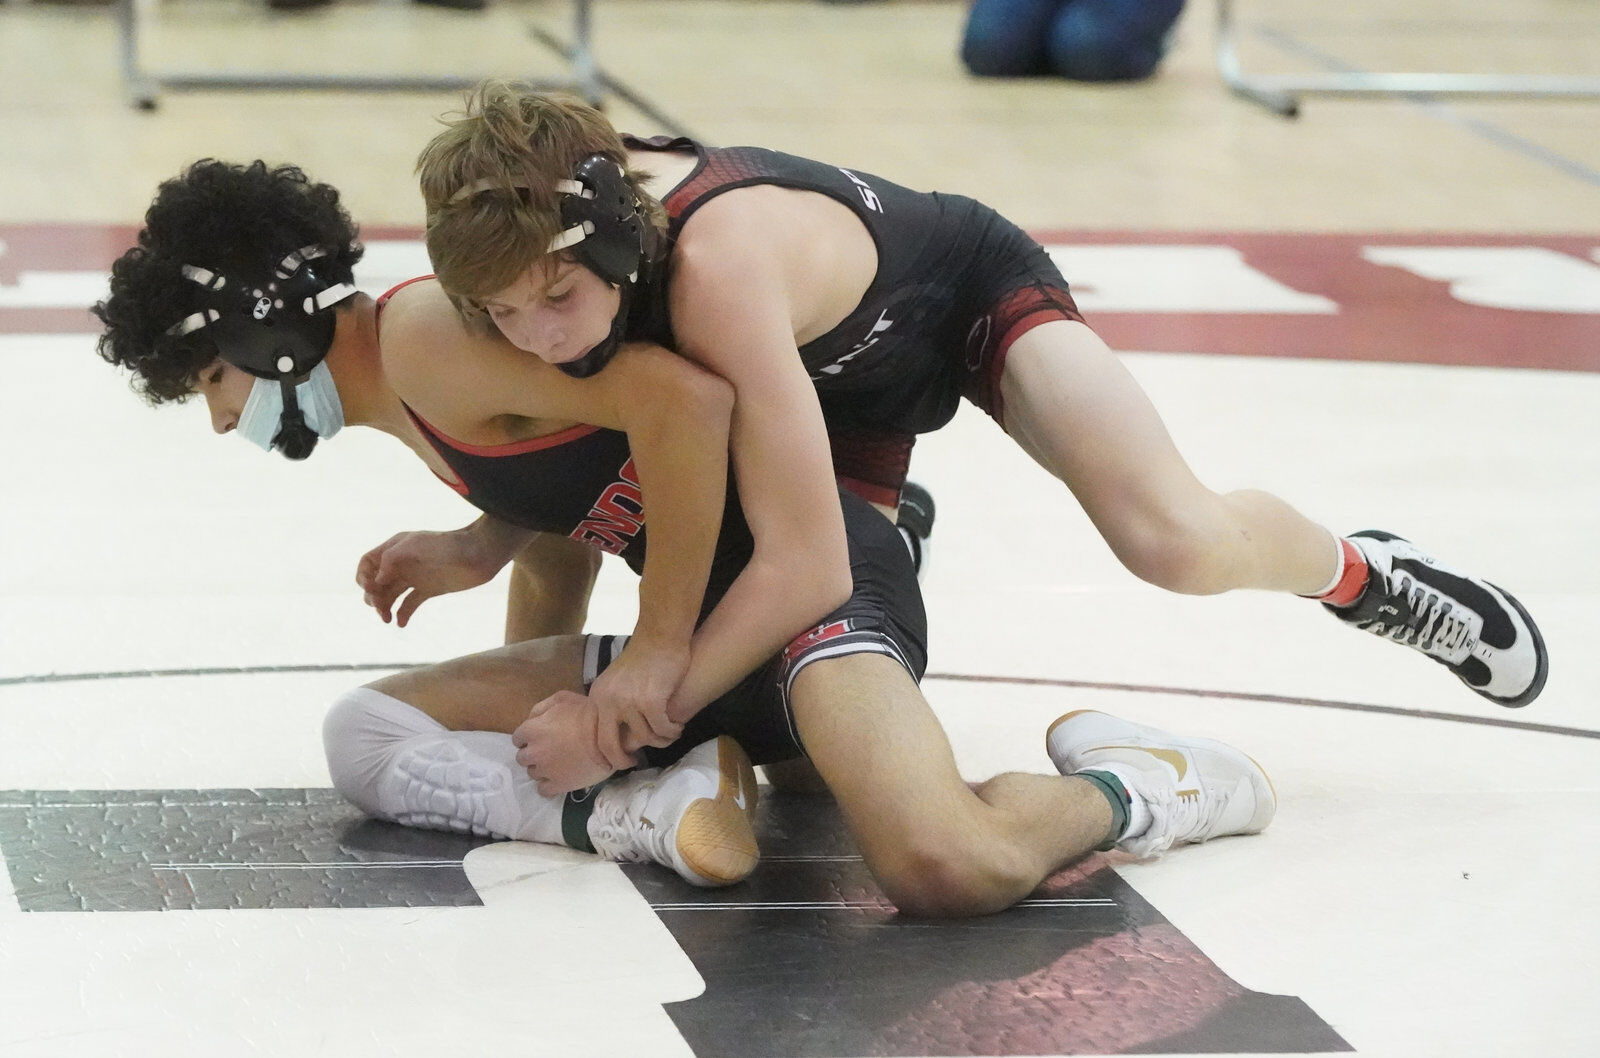 Multiple Section VI wrestlers named All-Americans by NHSCA